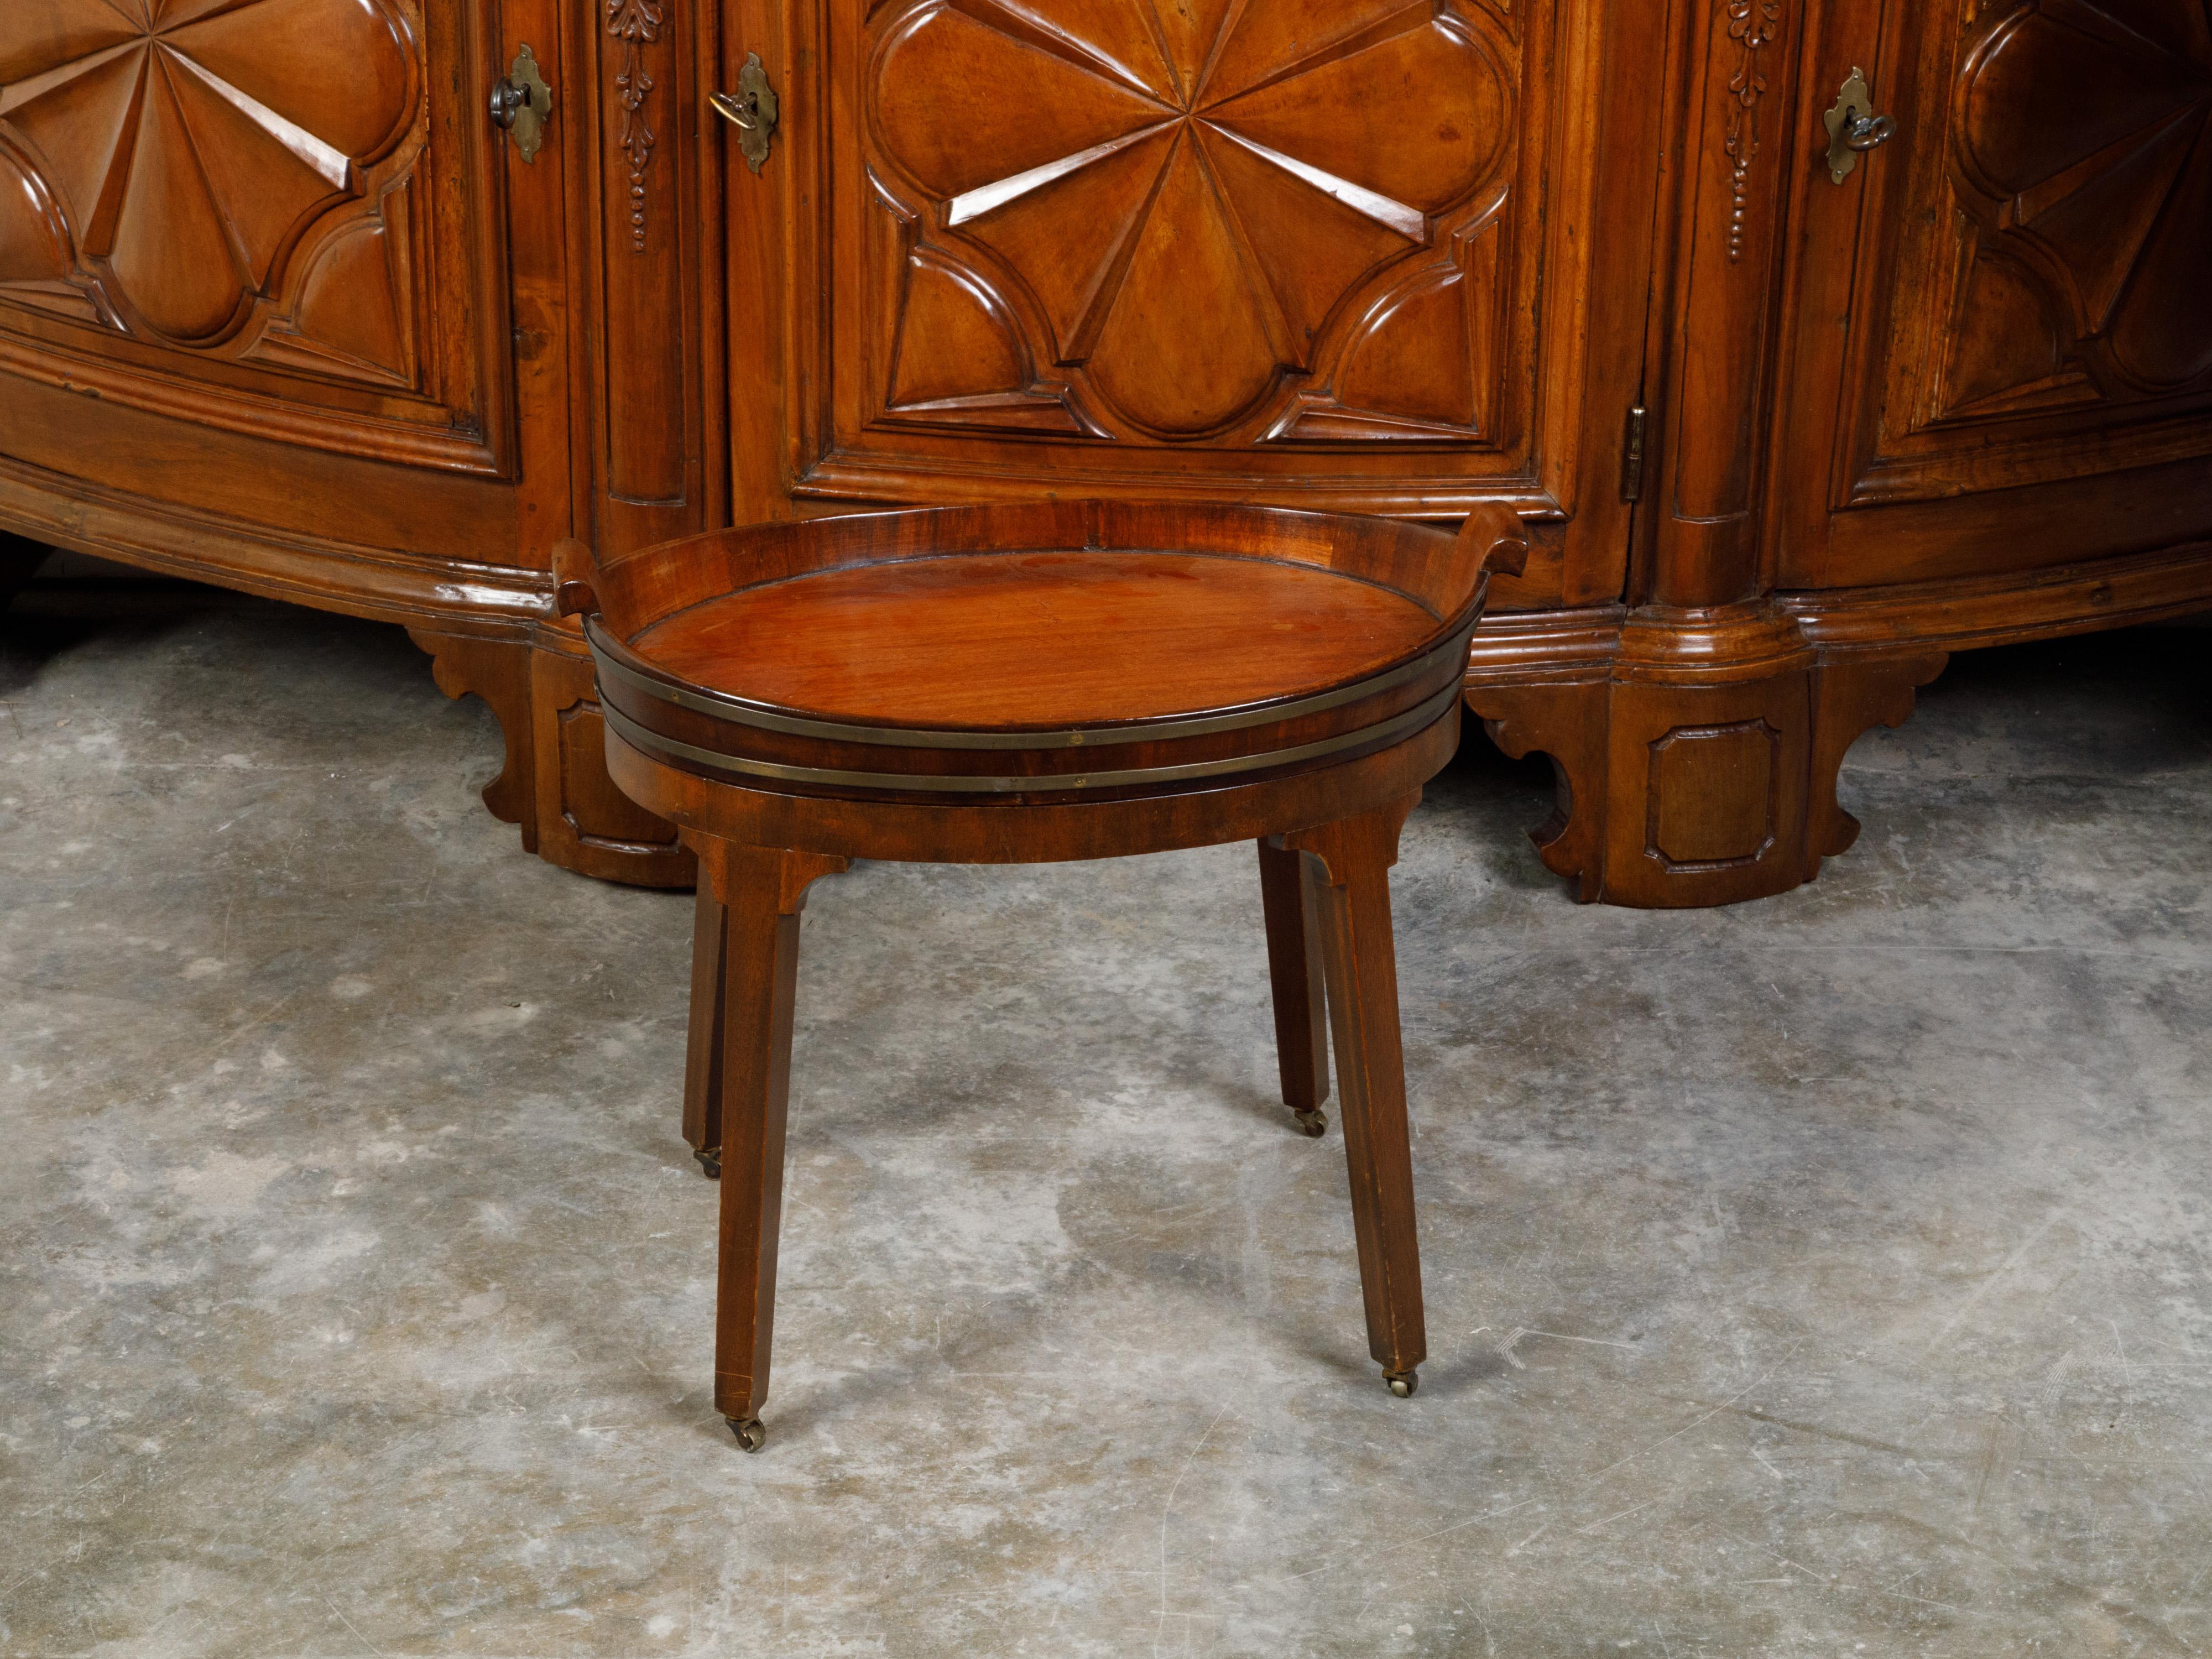 English 19th Century Oval Mahogany Tray Top Table with Brass Accents and Casters For Sale 5